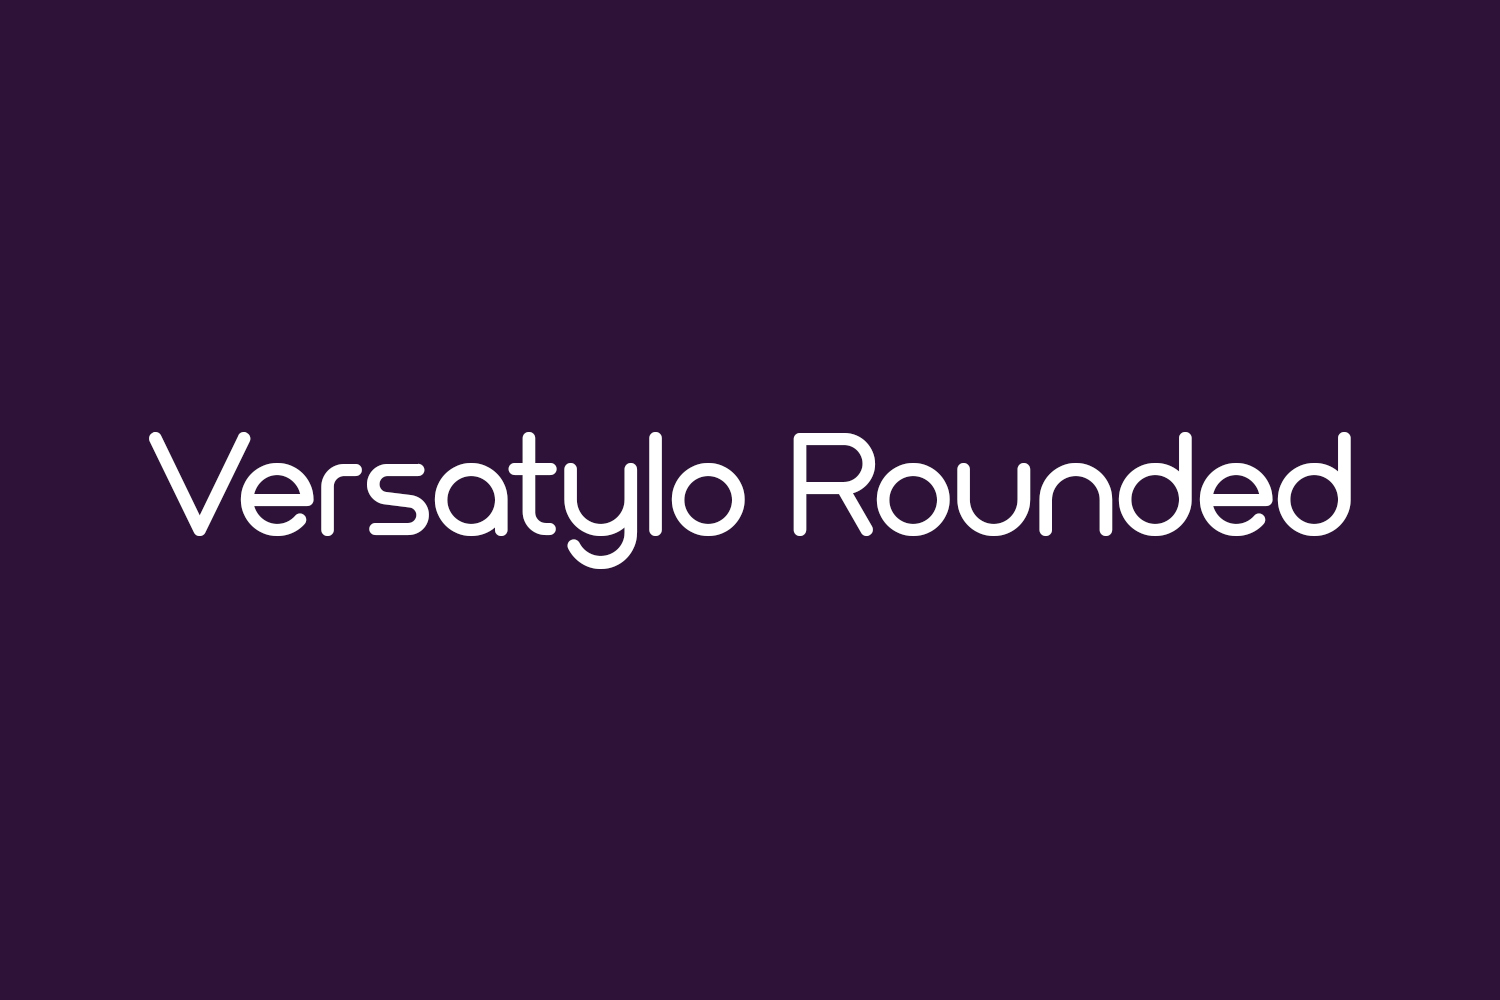 Versatylo Rounded Free Font